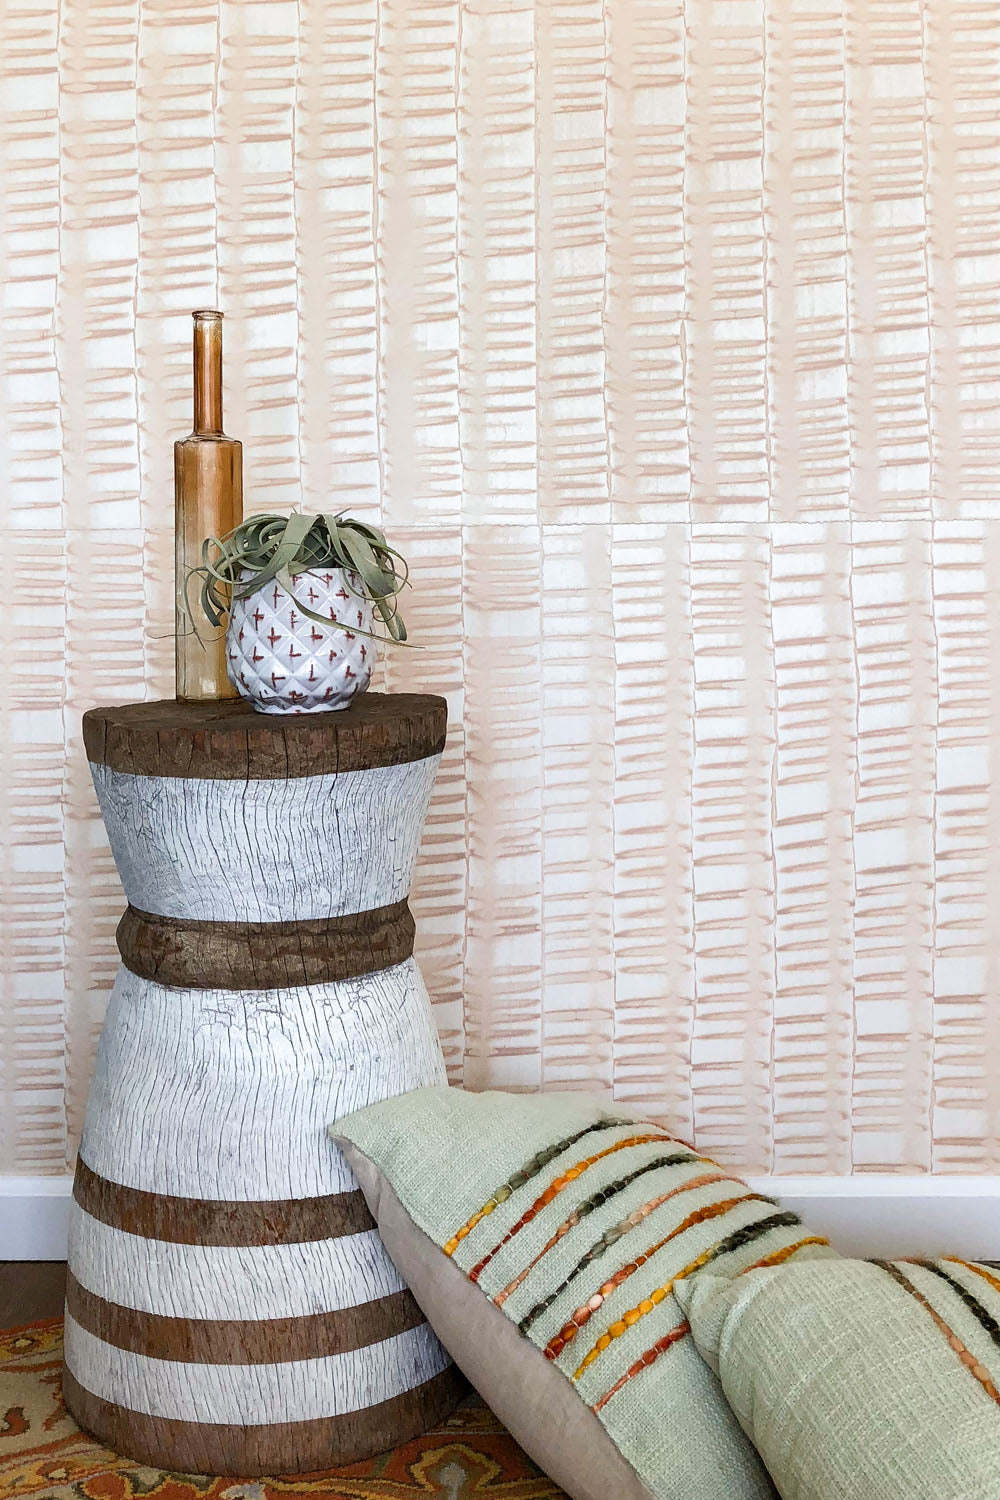 Pillows and an end table stand in front of a wall papered in an undulating ribbon pattern in peach.